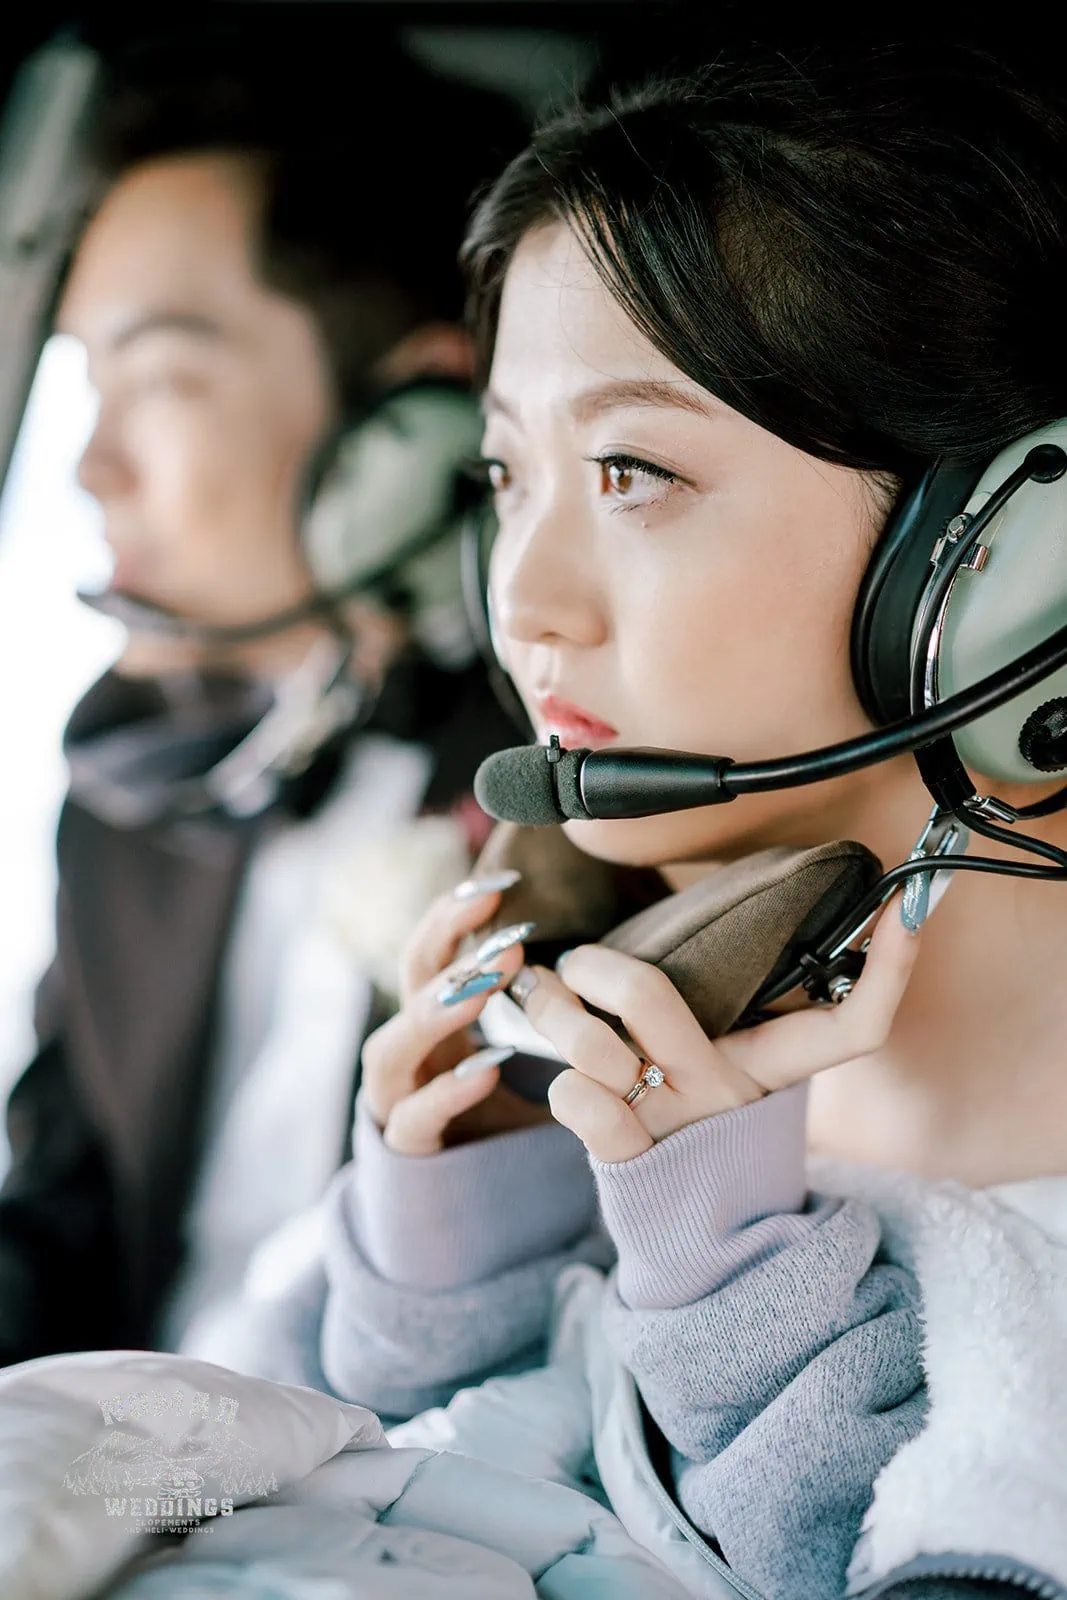 Queenstown New Zealand Elopement Wedding Photographer - Bo and Junyi have a memorable pre-wedding shoot that involves helicopters, headsets, and multiple landings.